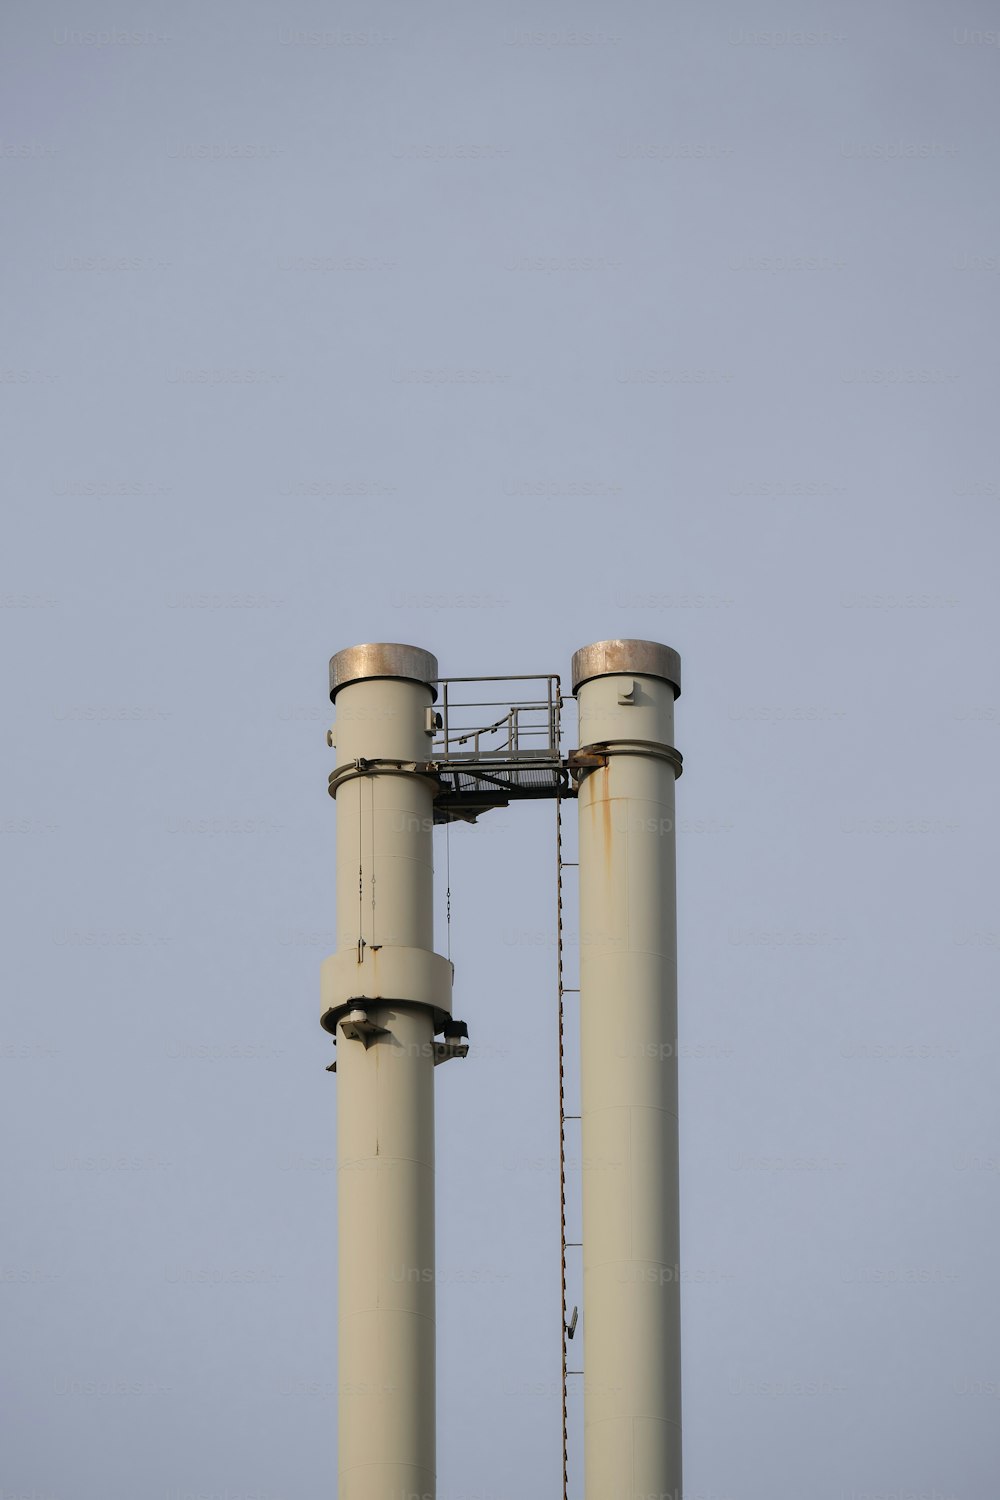 a couple of large metal pipes with a sky background